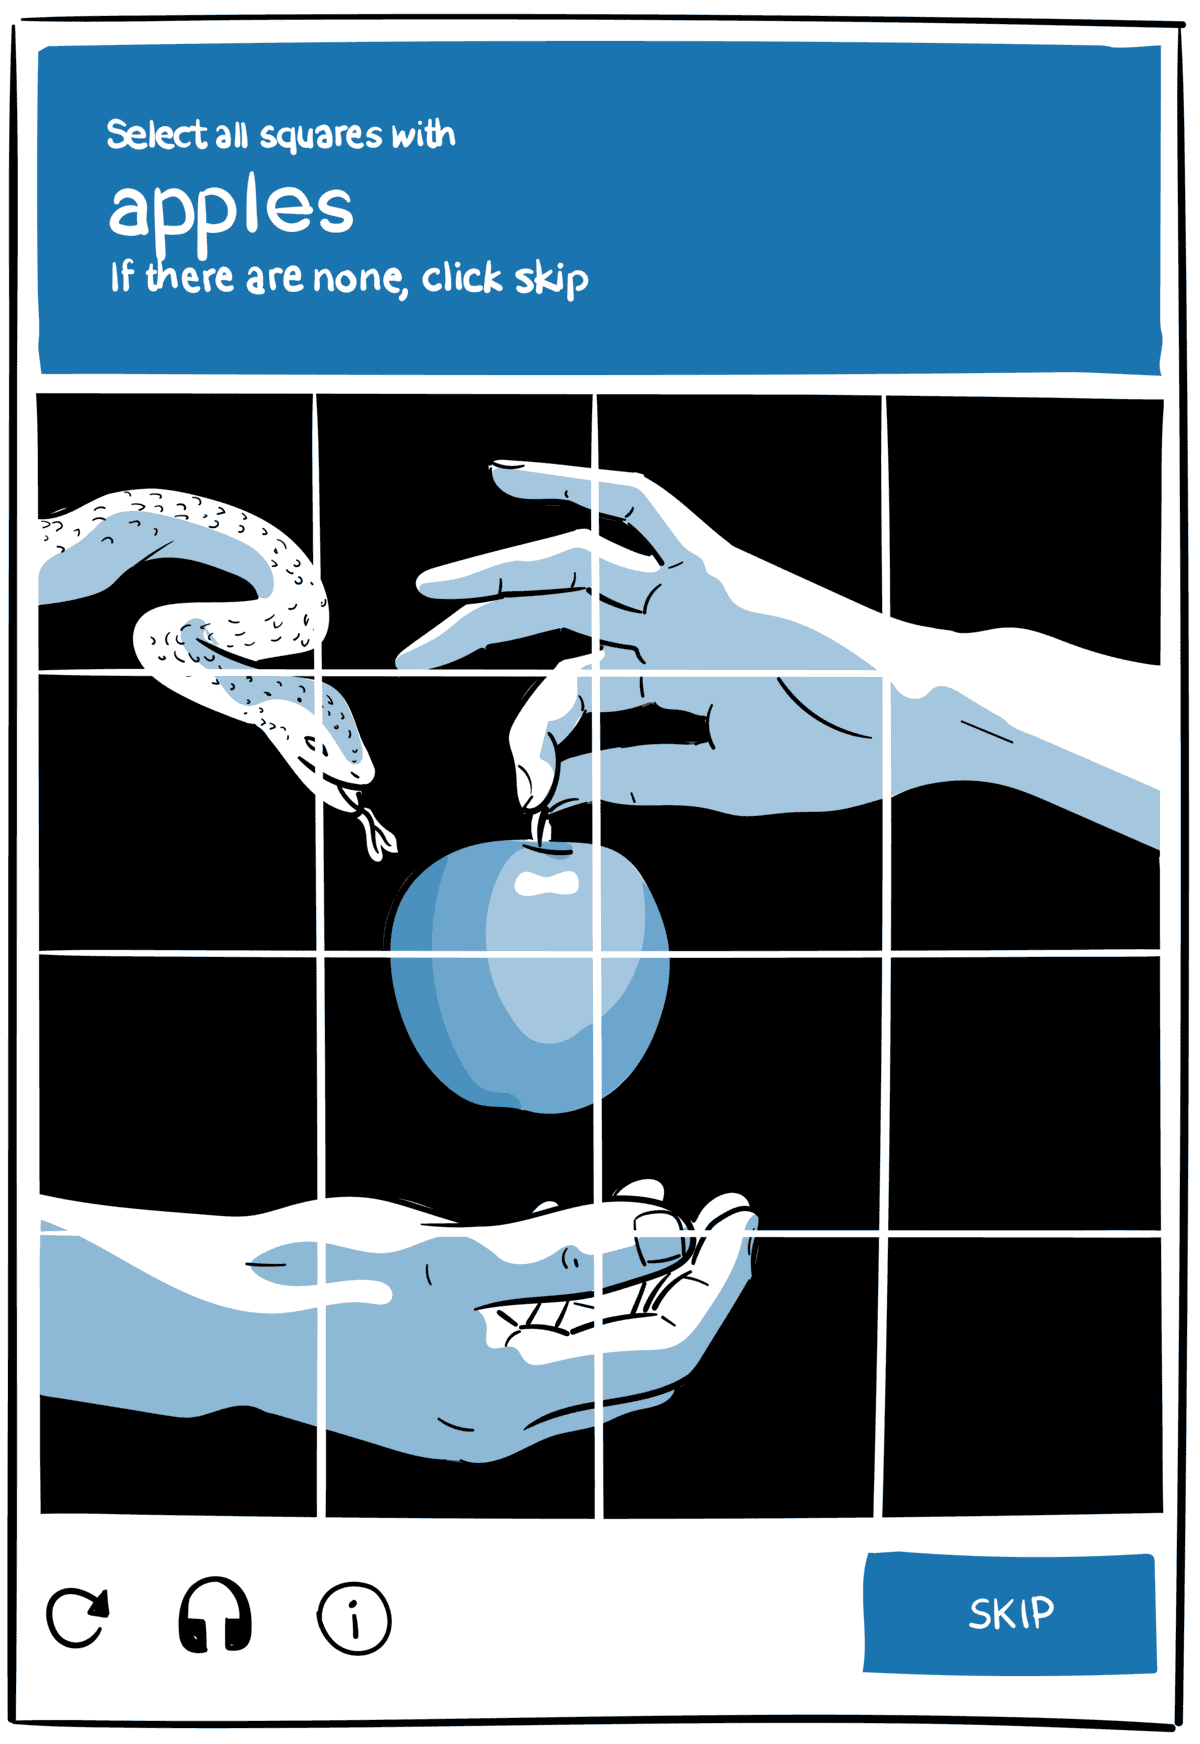 In your browser, a box appears to confirm you are human. It says "select all squares with apples. If there are none, click skip. Below is an imagine of two hands, one dangled an apple from its stem, and the other cupped under the fruit to catch it. A snake hovers in the corner, flicking its tongue.